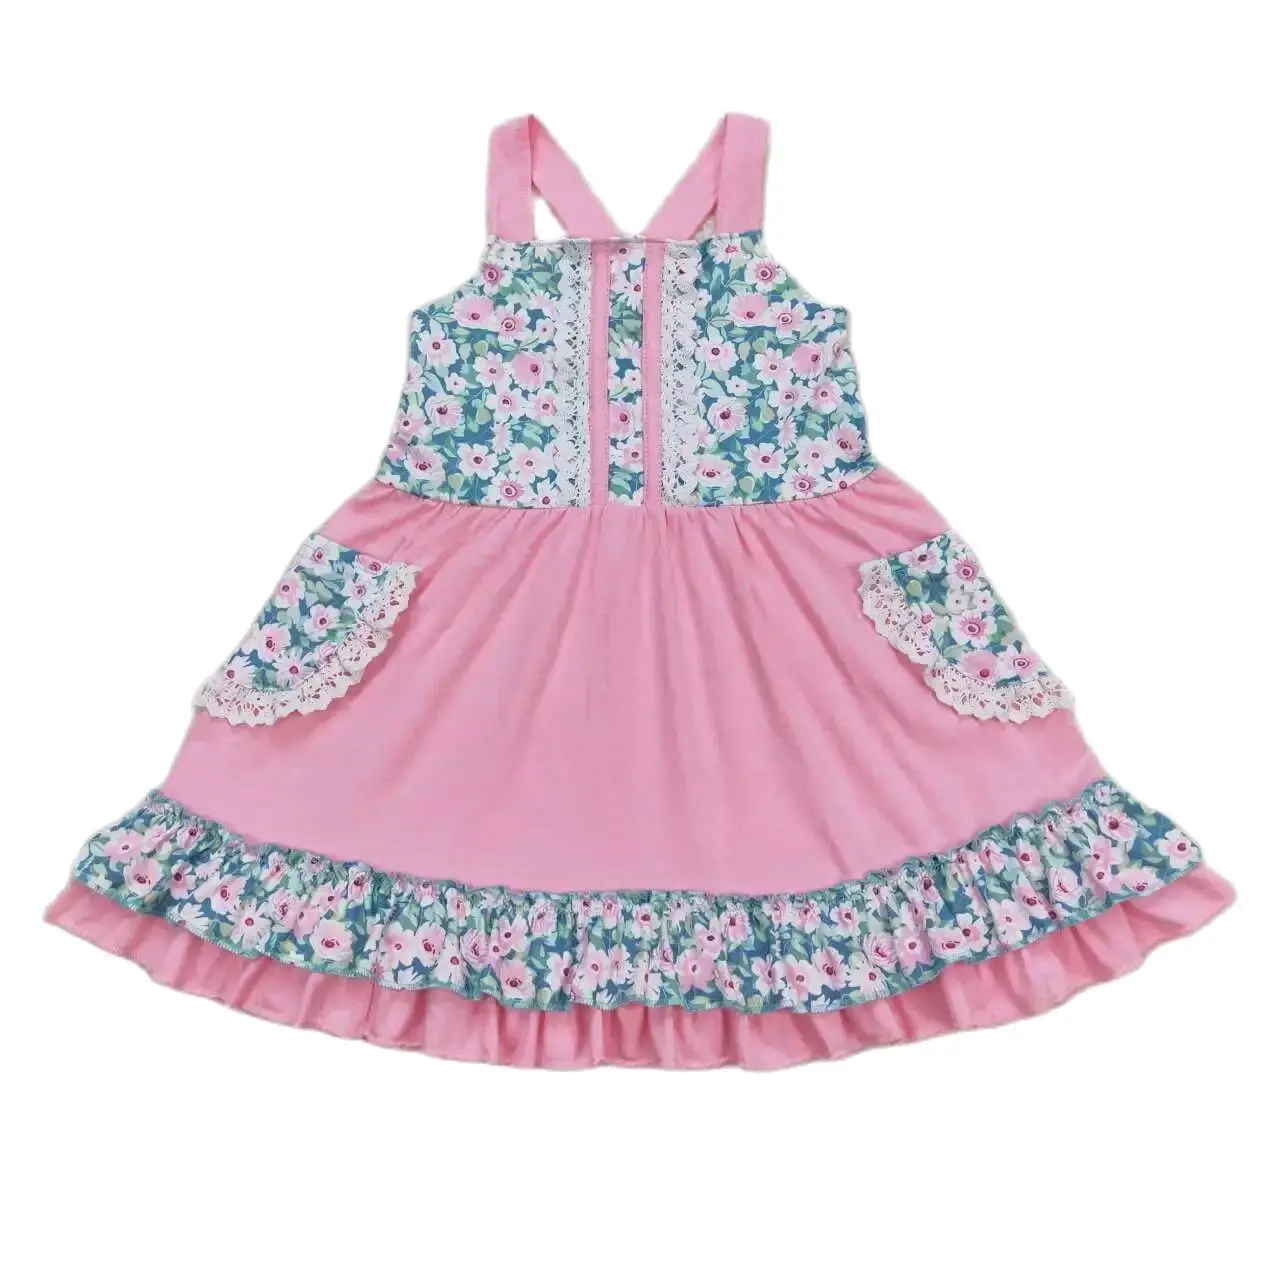 

Baby Girls pink floral Dress toddlers Wholesale Boutique summer Clothing Children Kids short Sleeves twirl Skirts popular